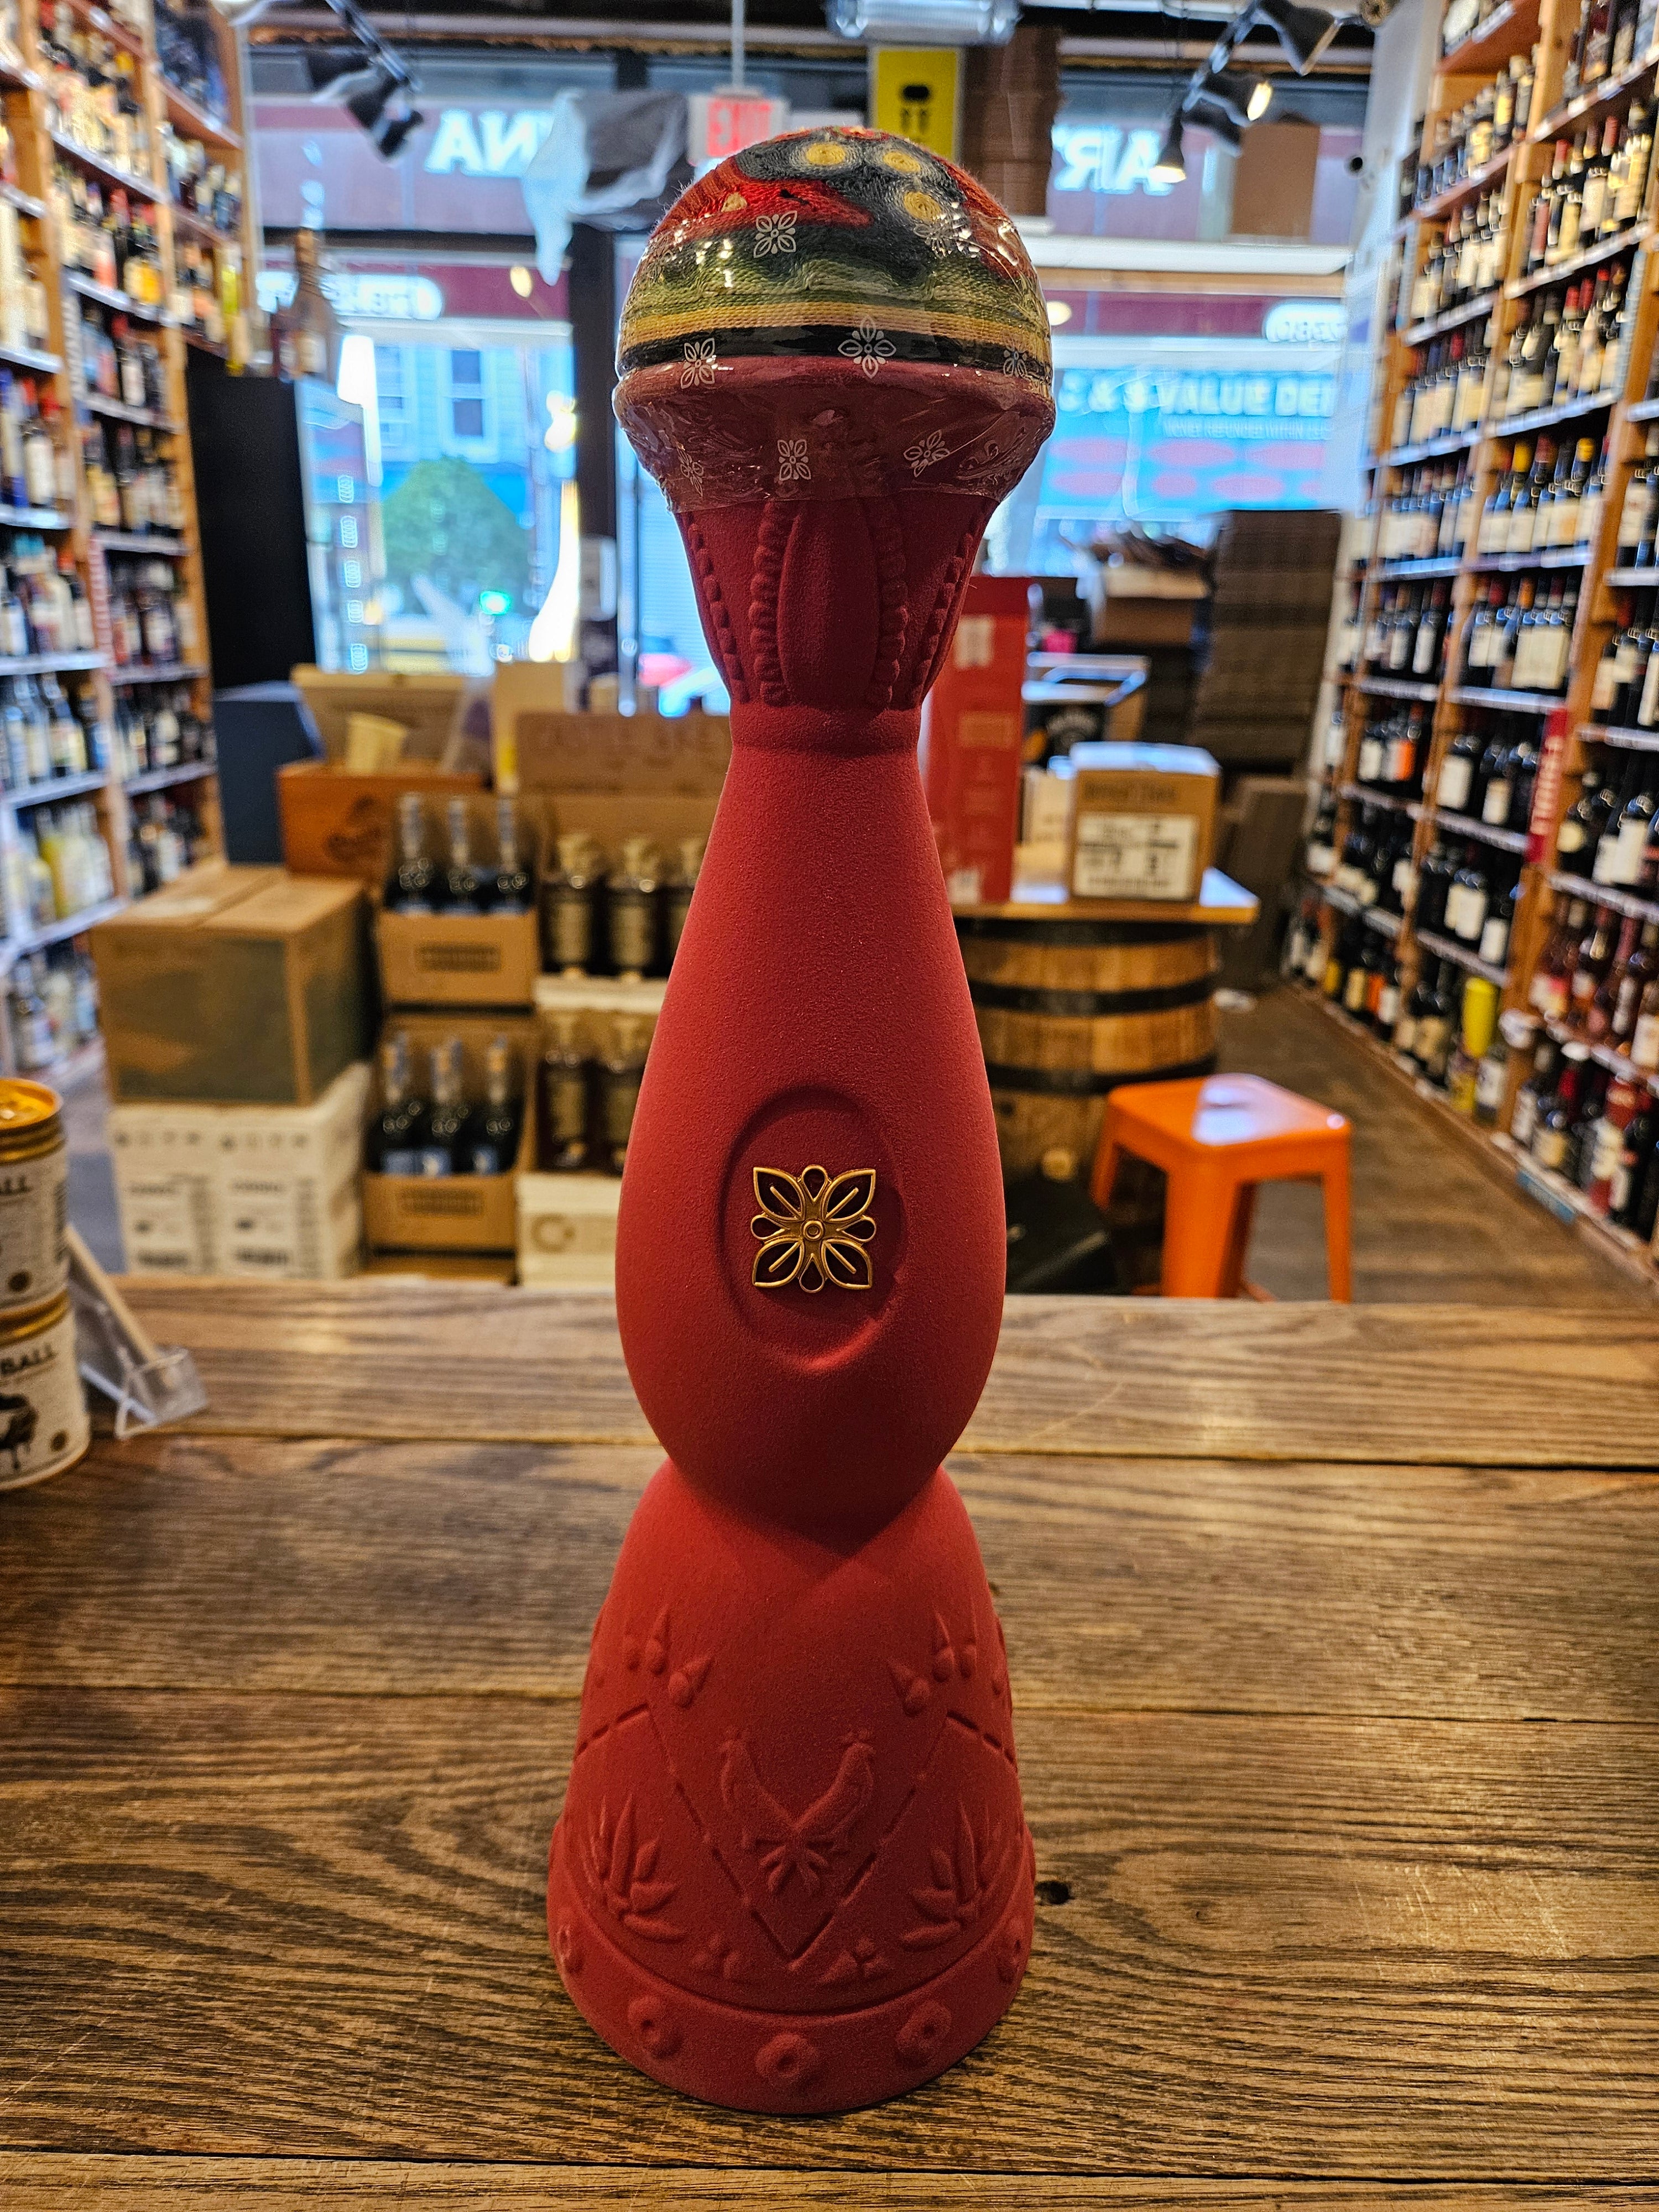 Clase Azul Mezcal San Luis Potosí 750mL a handmade red elegantly shaped ceramic bottle with a colorful bell top